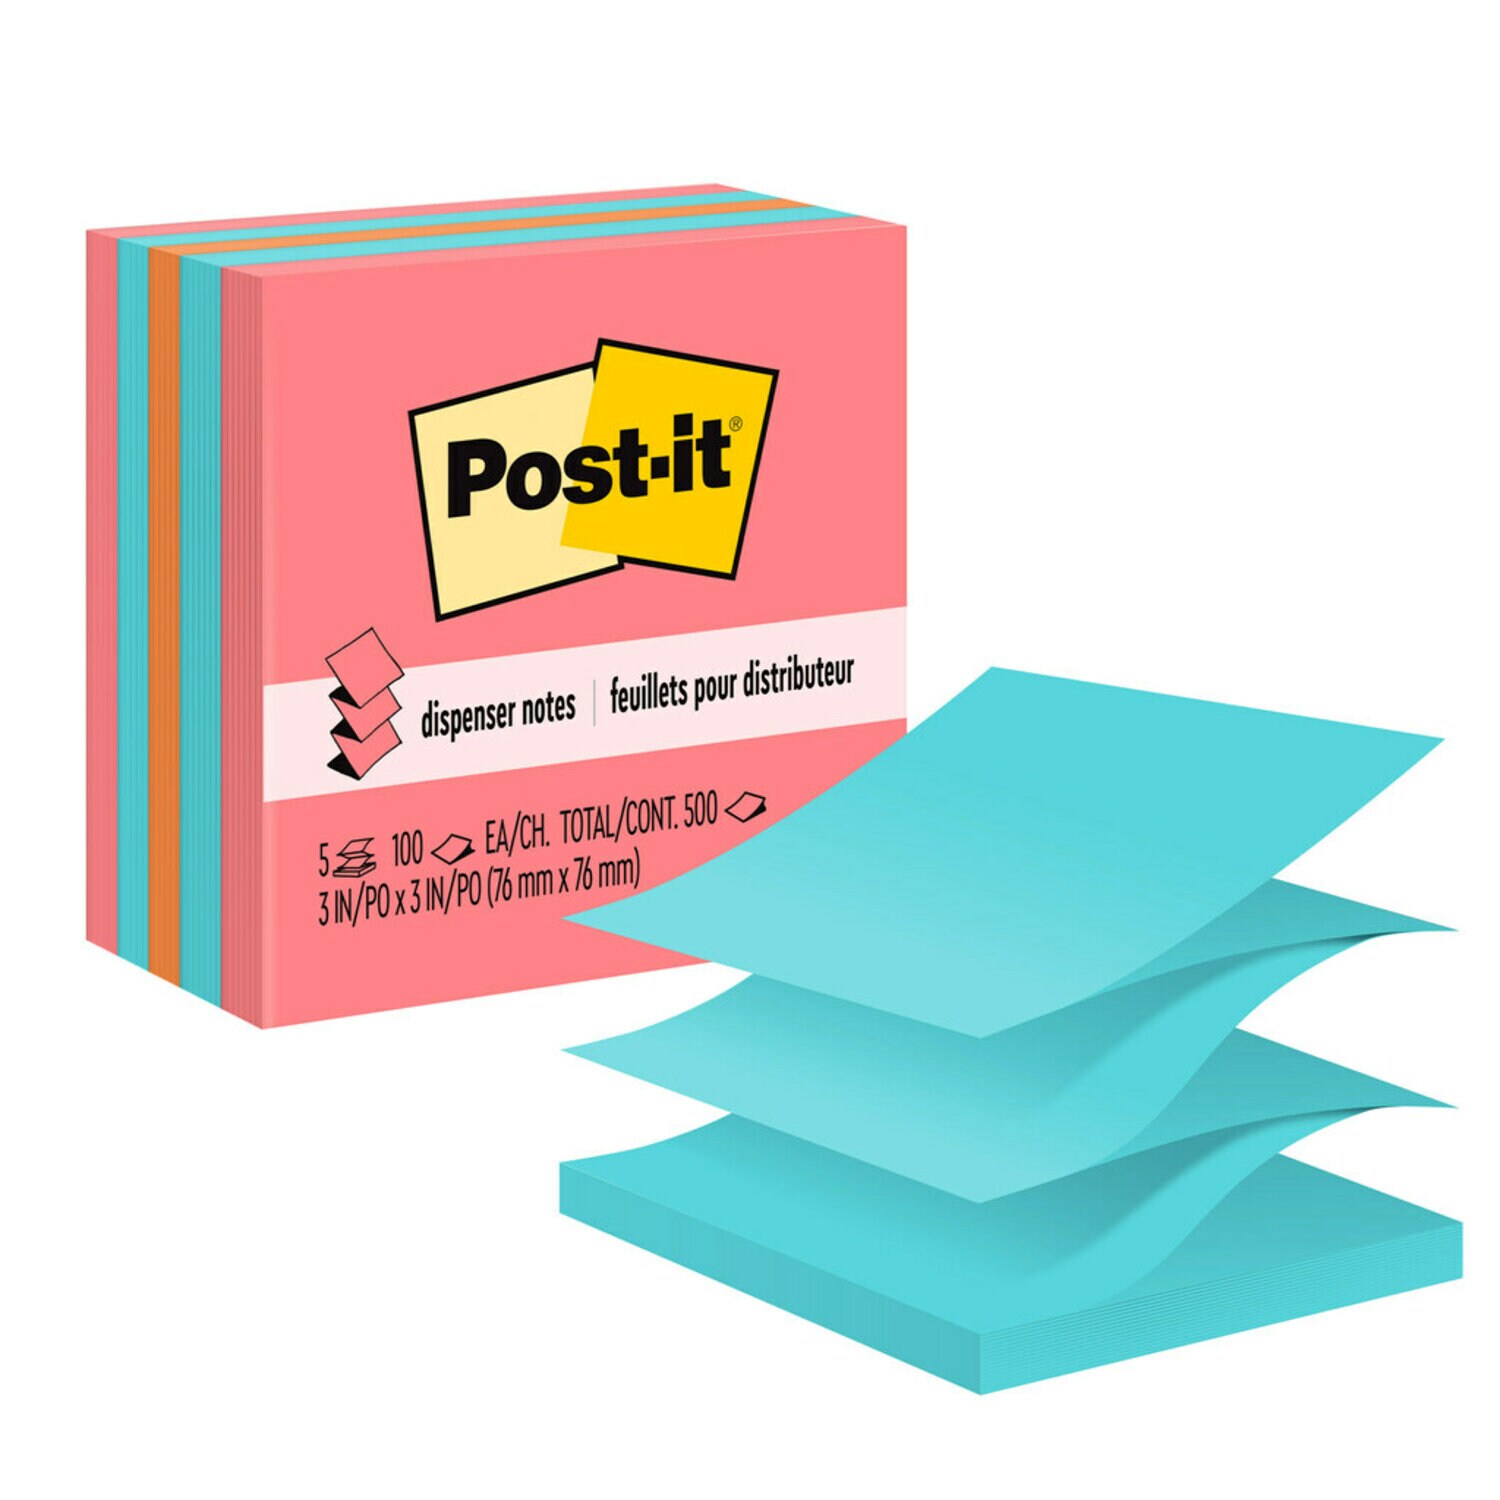 7100096570 - Post-it Dispenser Pop-up Notes 3301-5AN, 3 in x 3 in